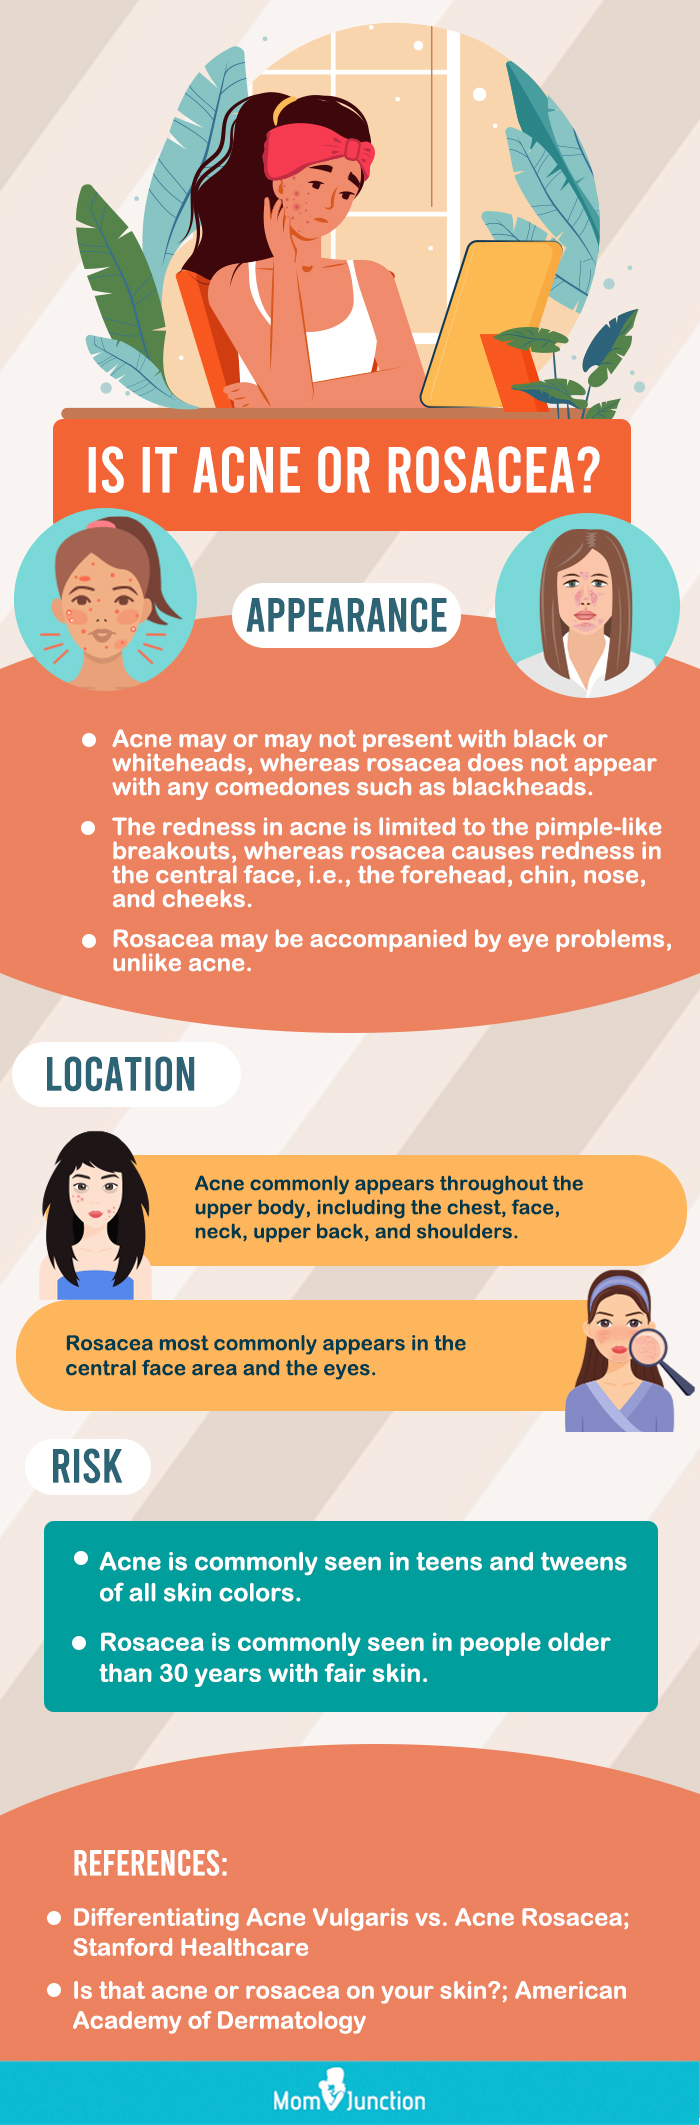 is it acne or rosacea (infographic)